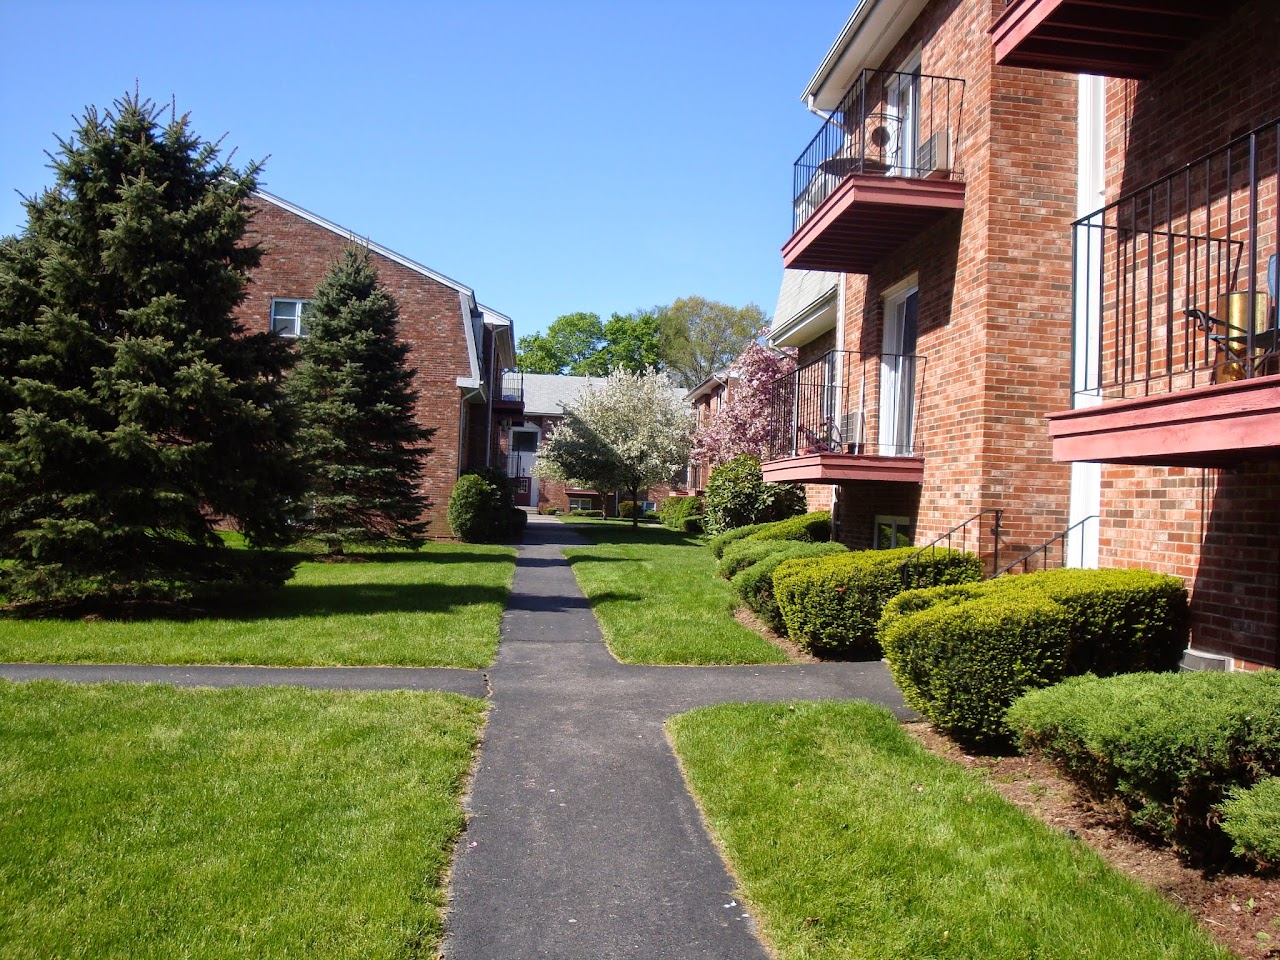 Photo of PINE GROVE. Affordable housing located at 240 HIGH ST TAUNTON, MA 02780